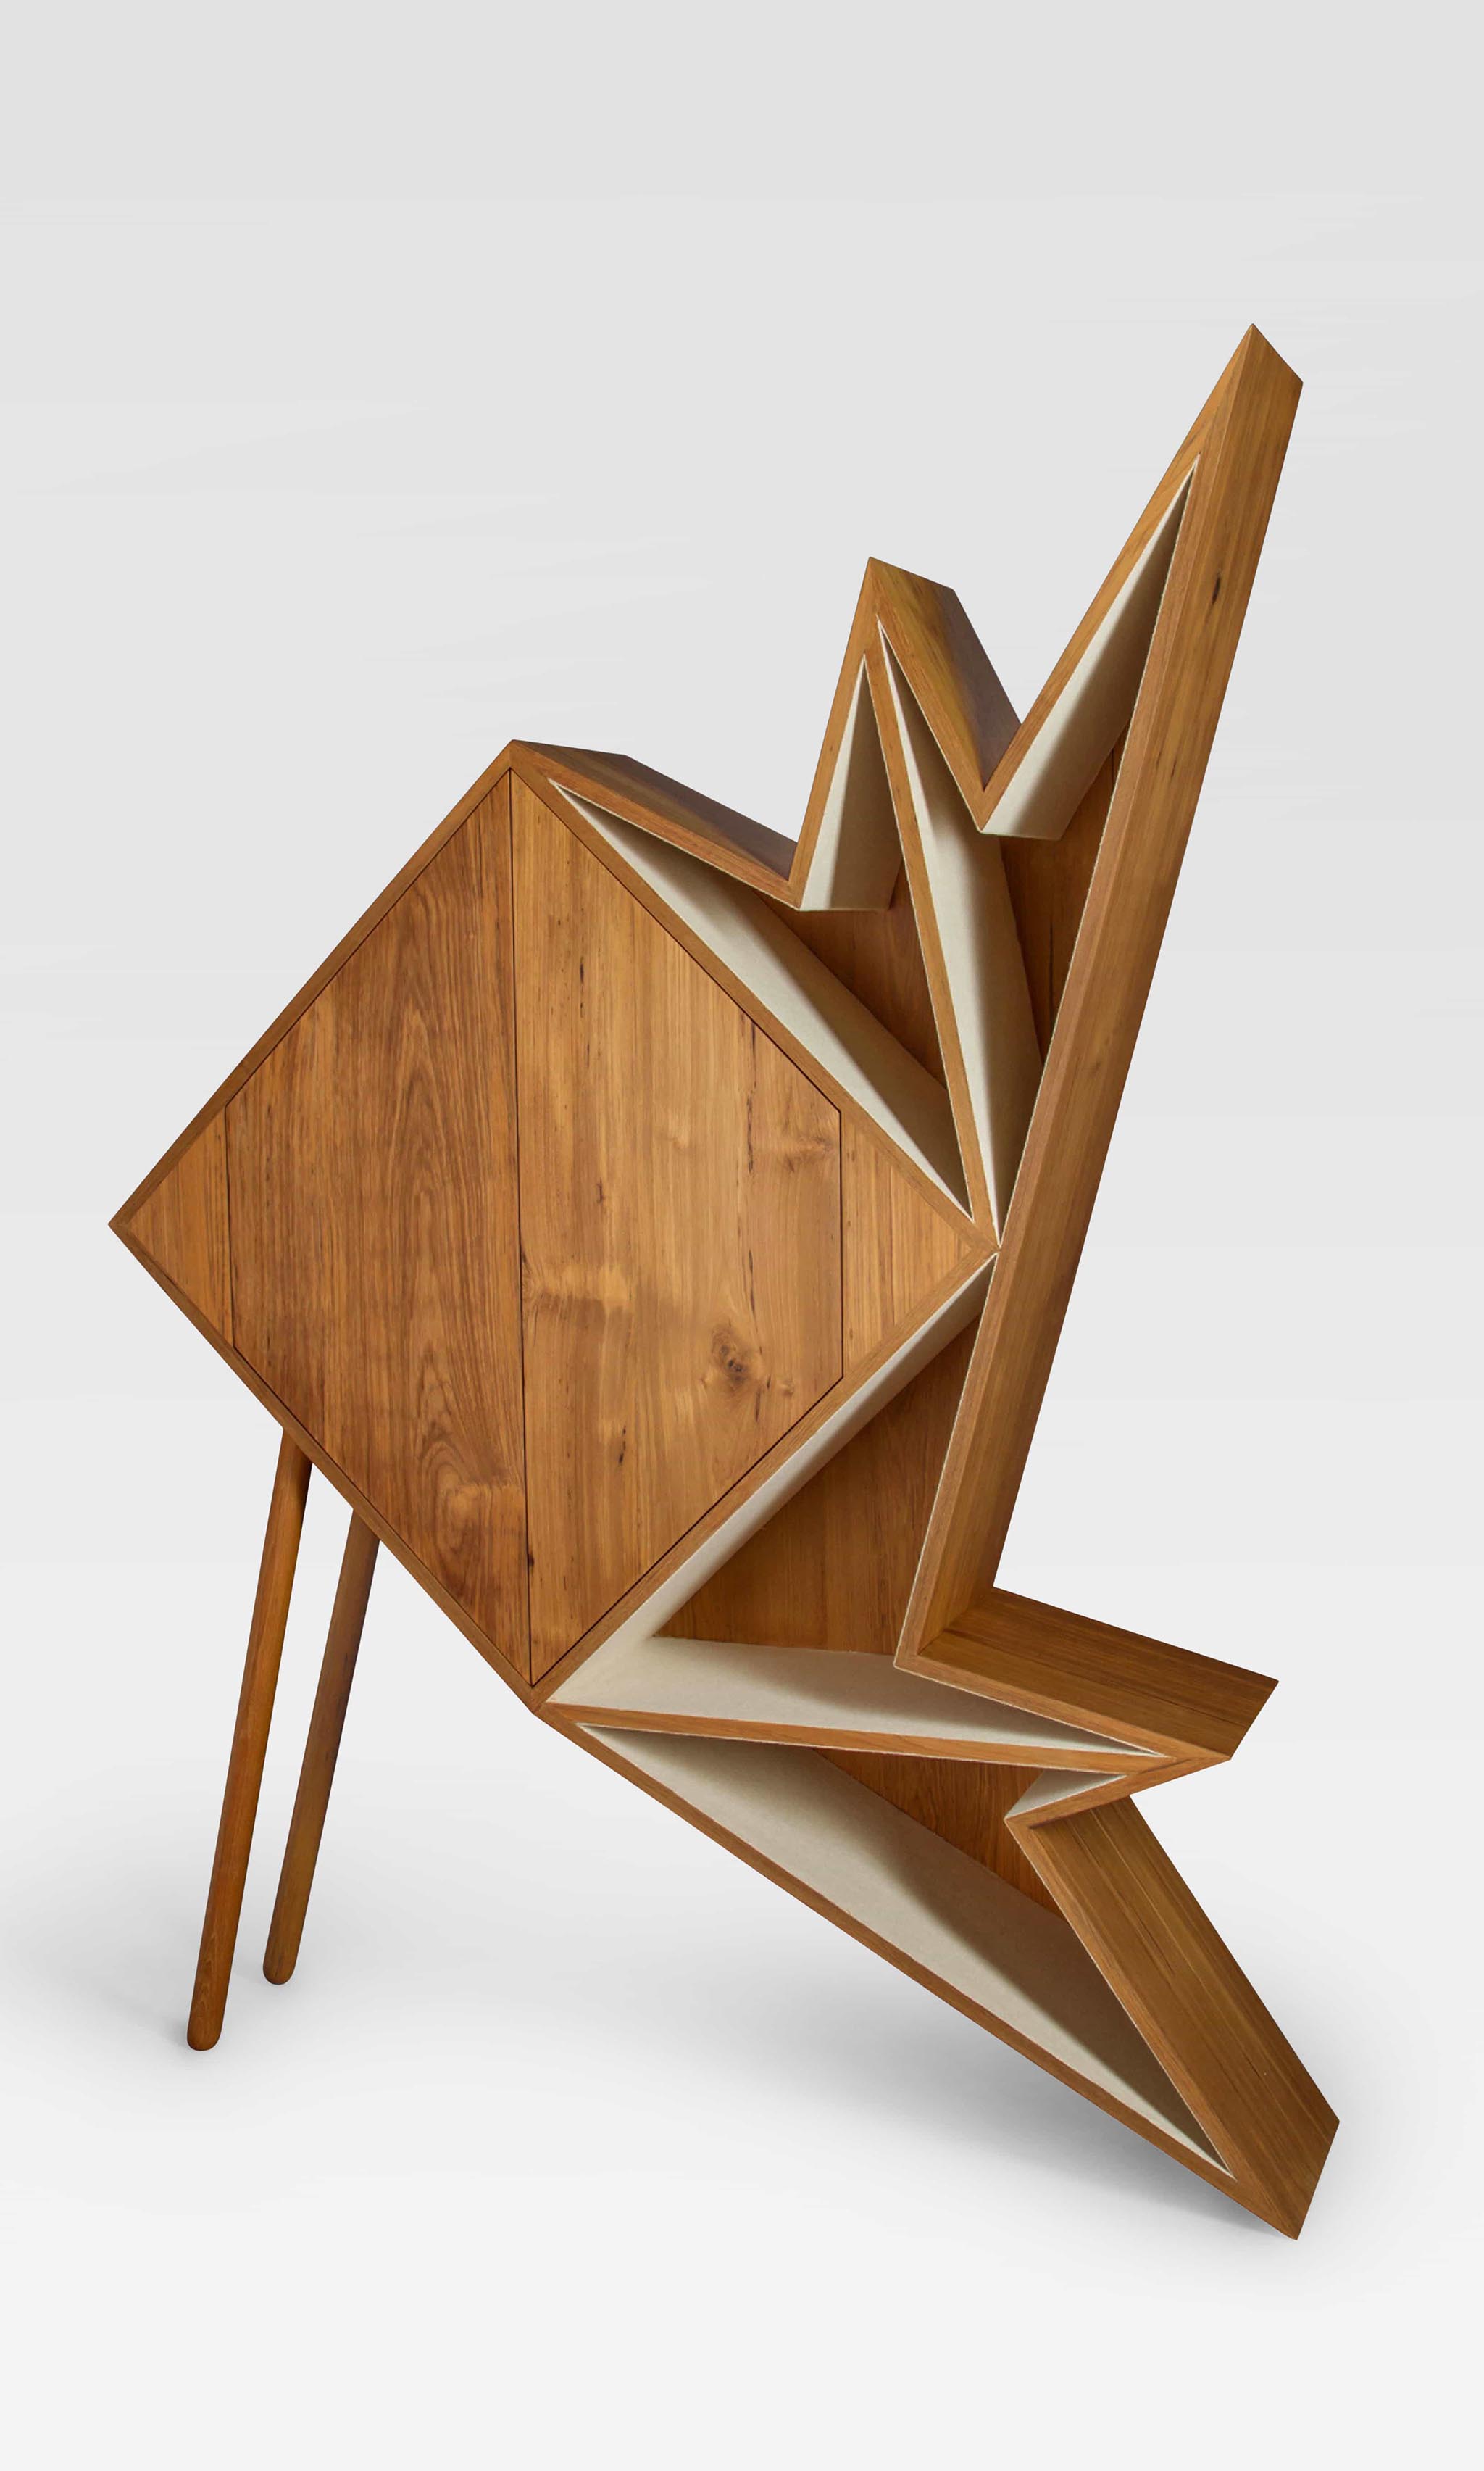 contemporary origami-inspired wooden Oru cabinet by Aljoud Lootah